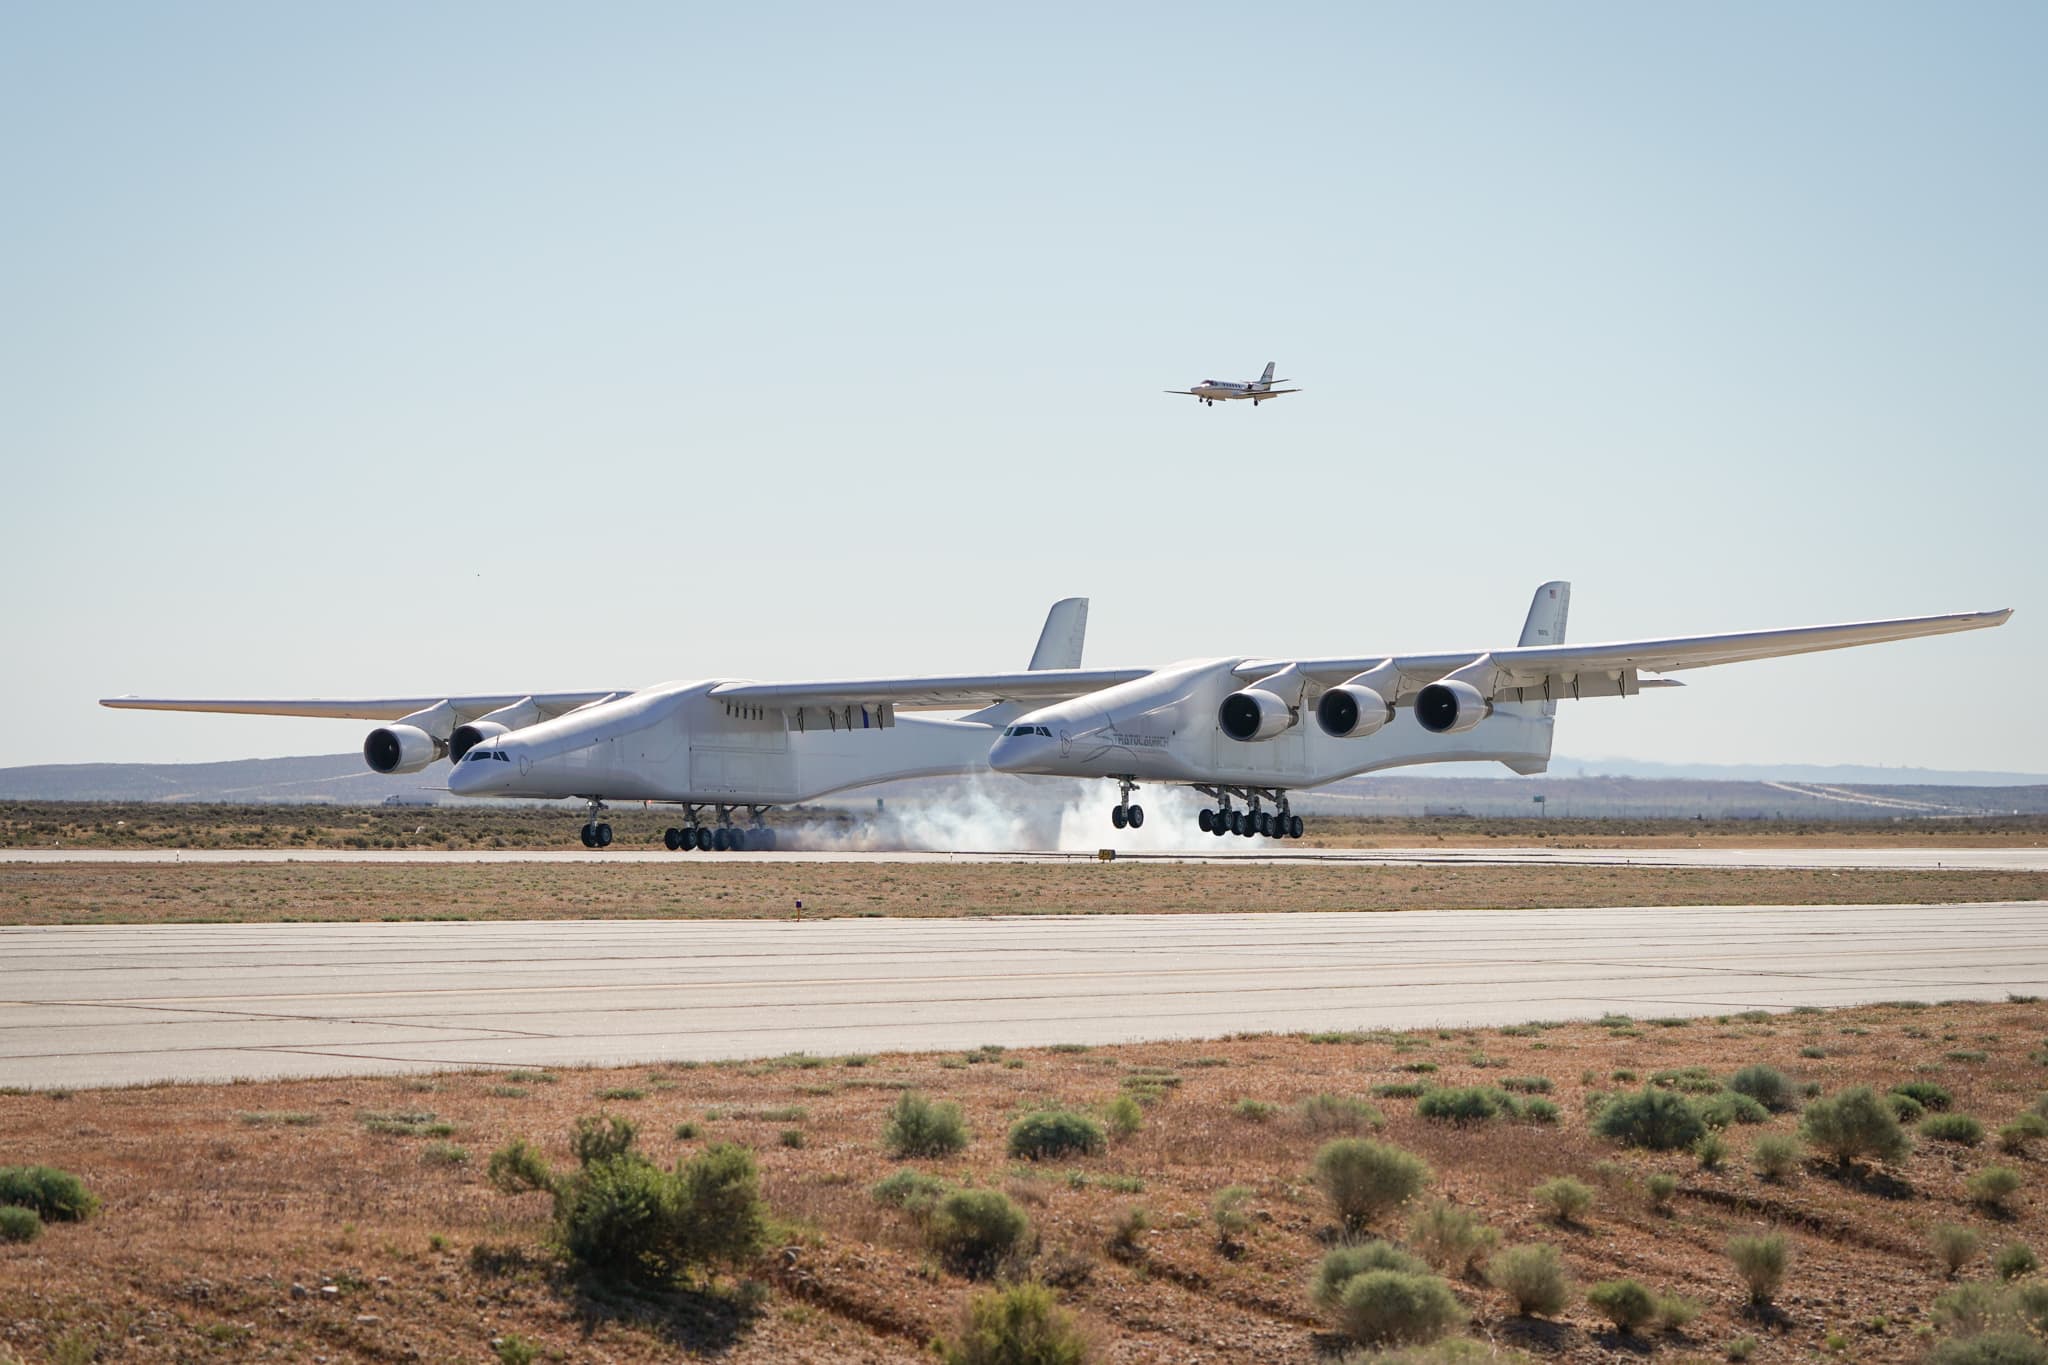 Vulcan selling Stratolaunch world's largest airplane for $400 million